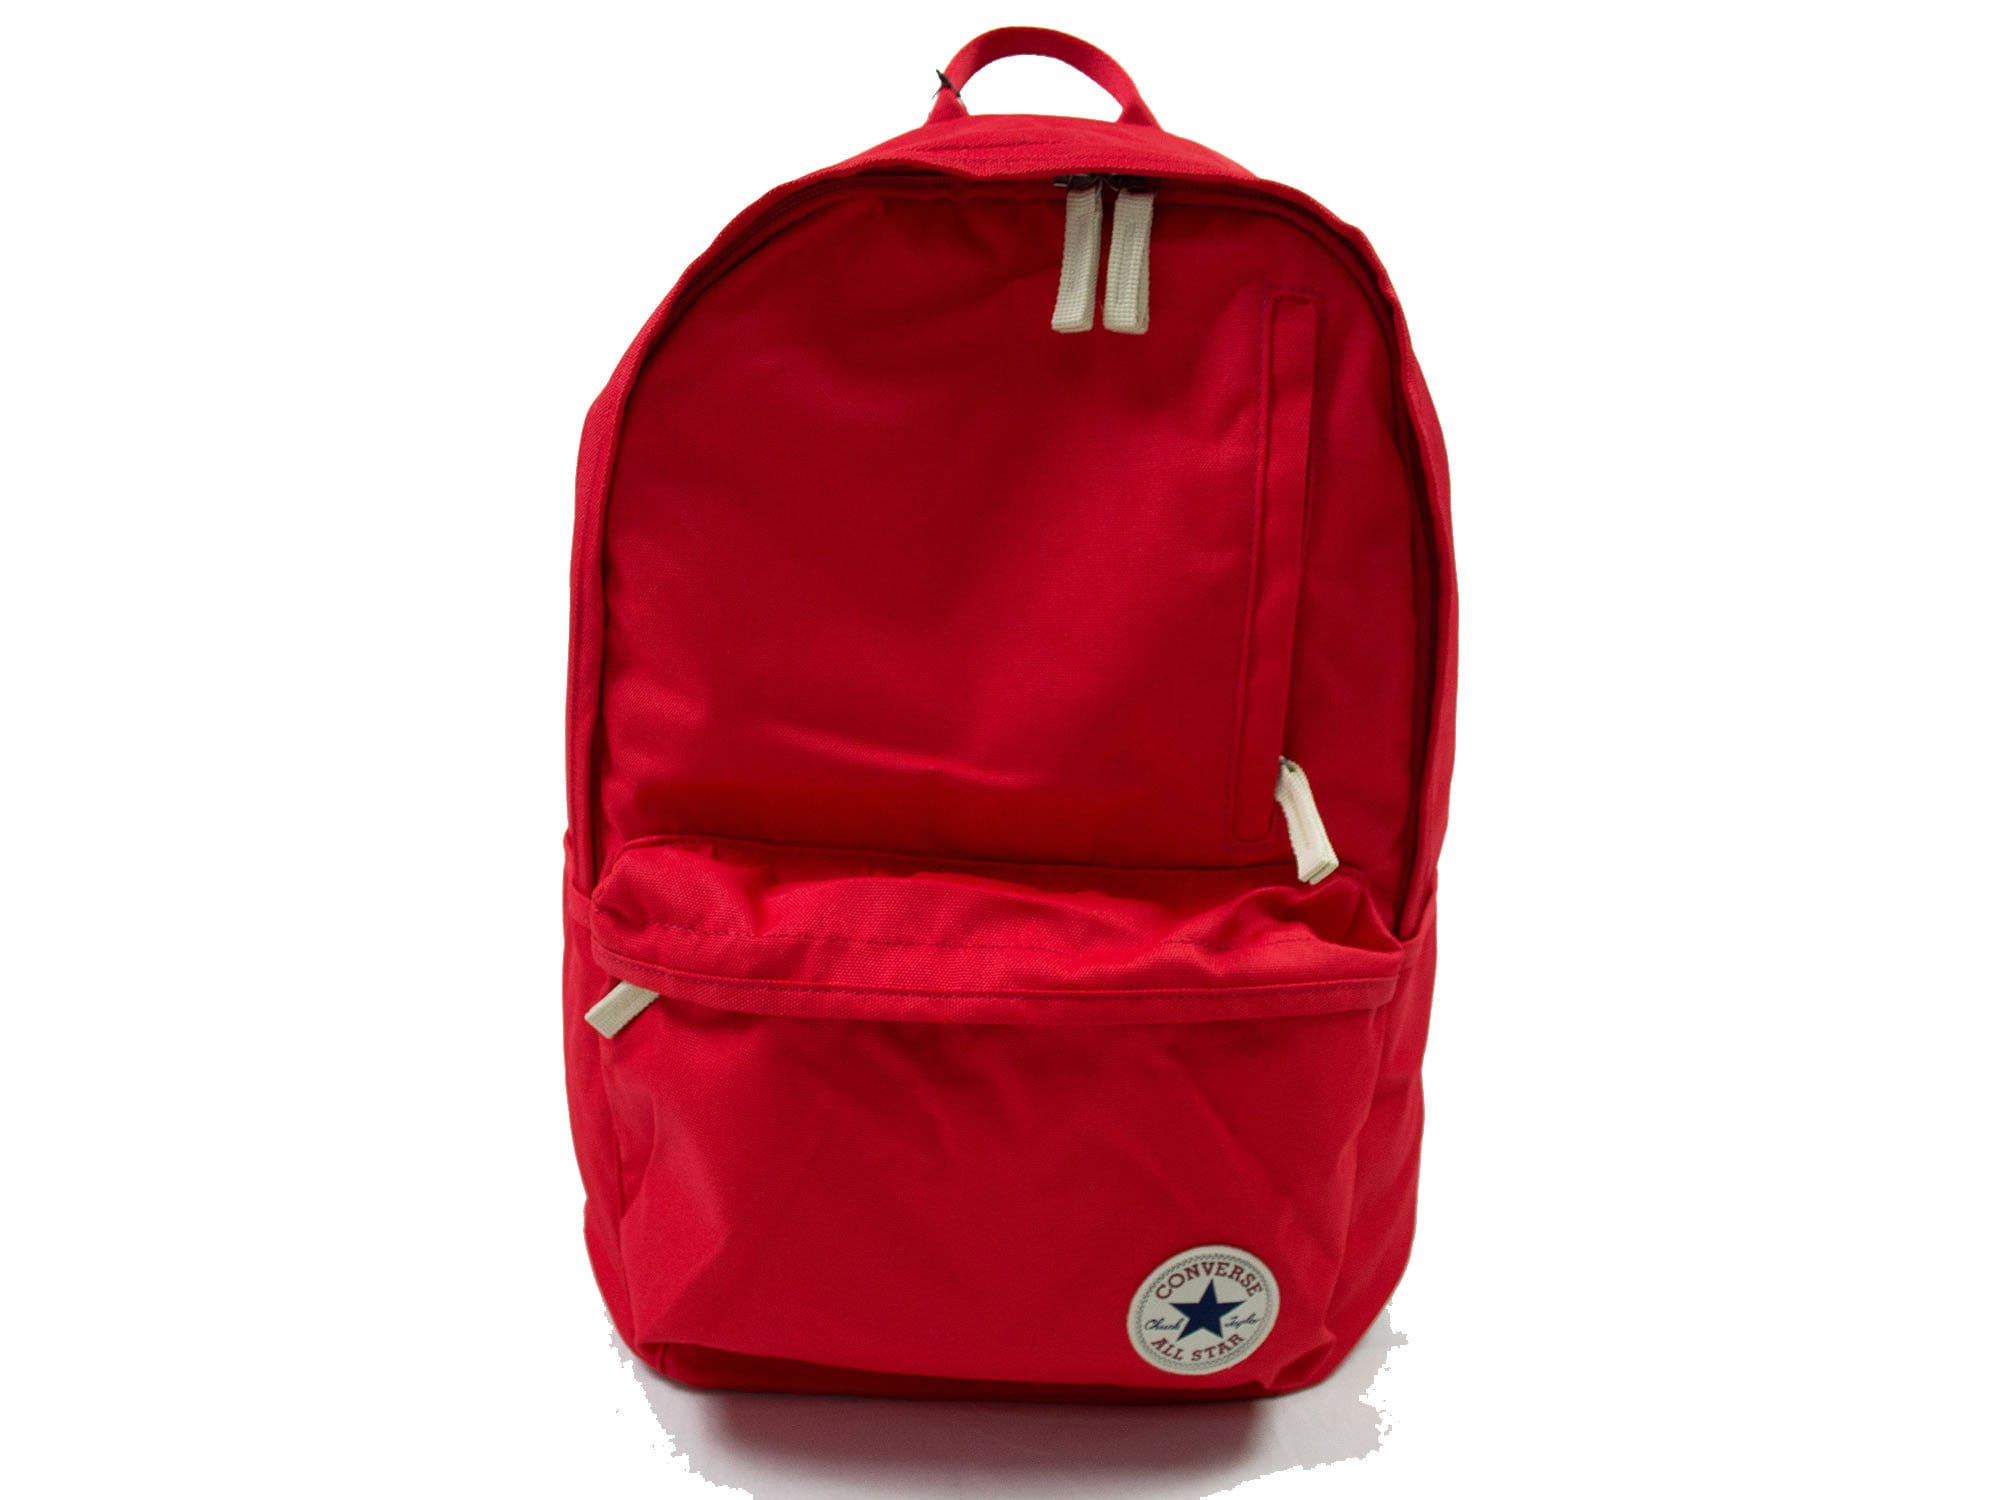 Converse All Star Red Backpack Bag - Etsy